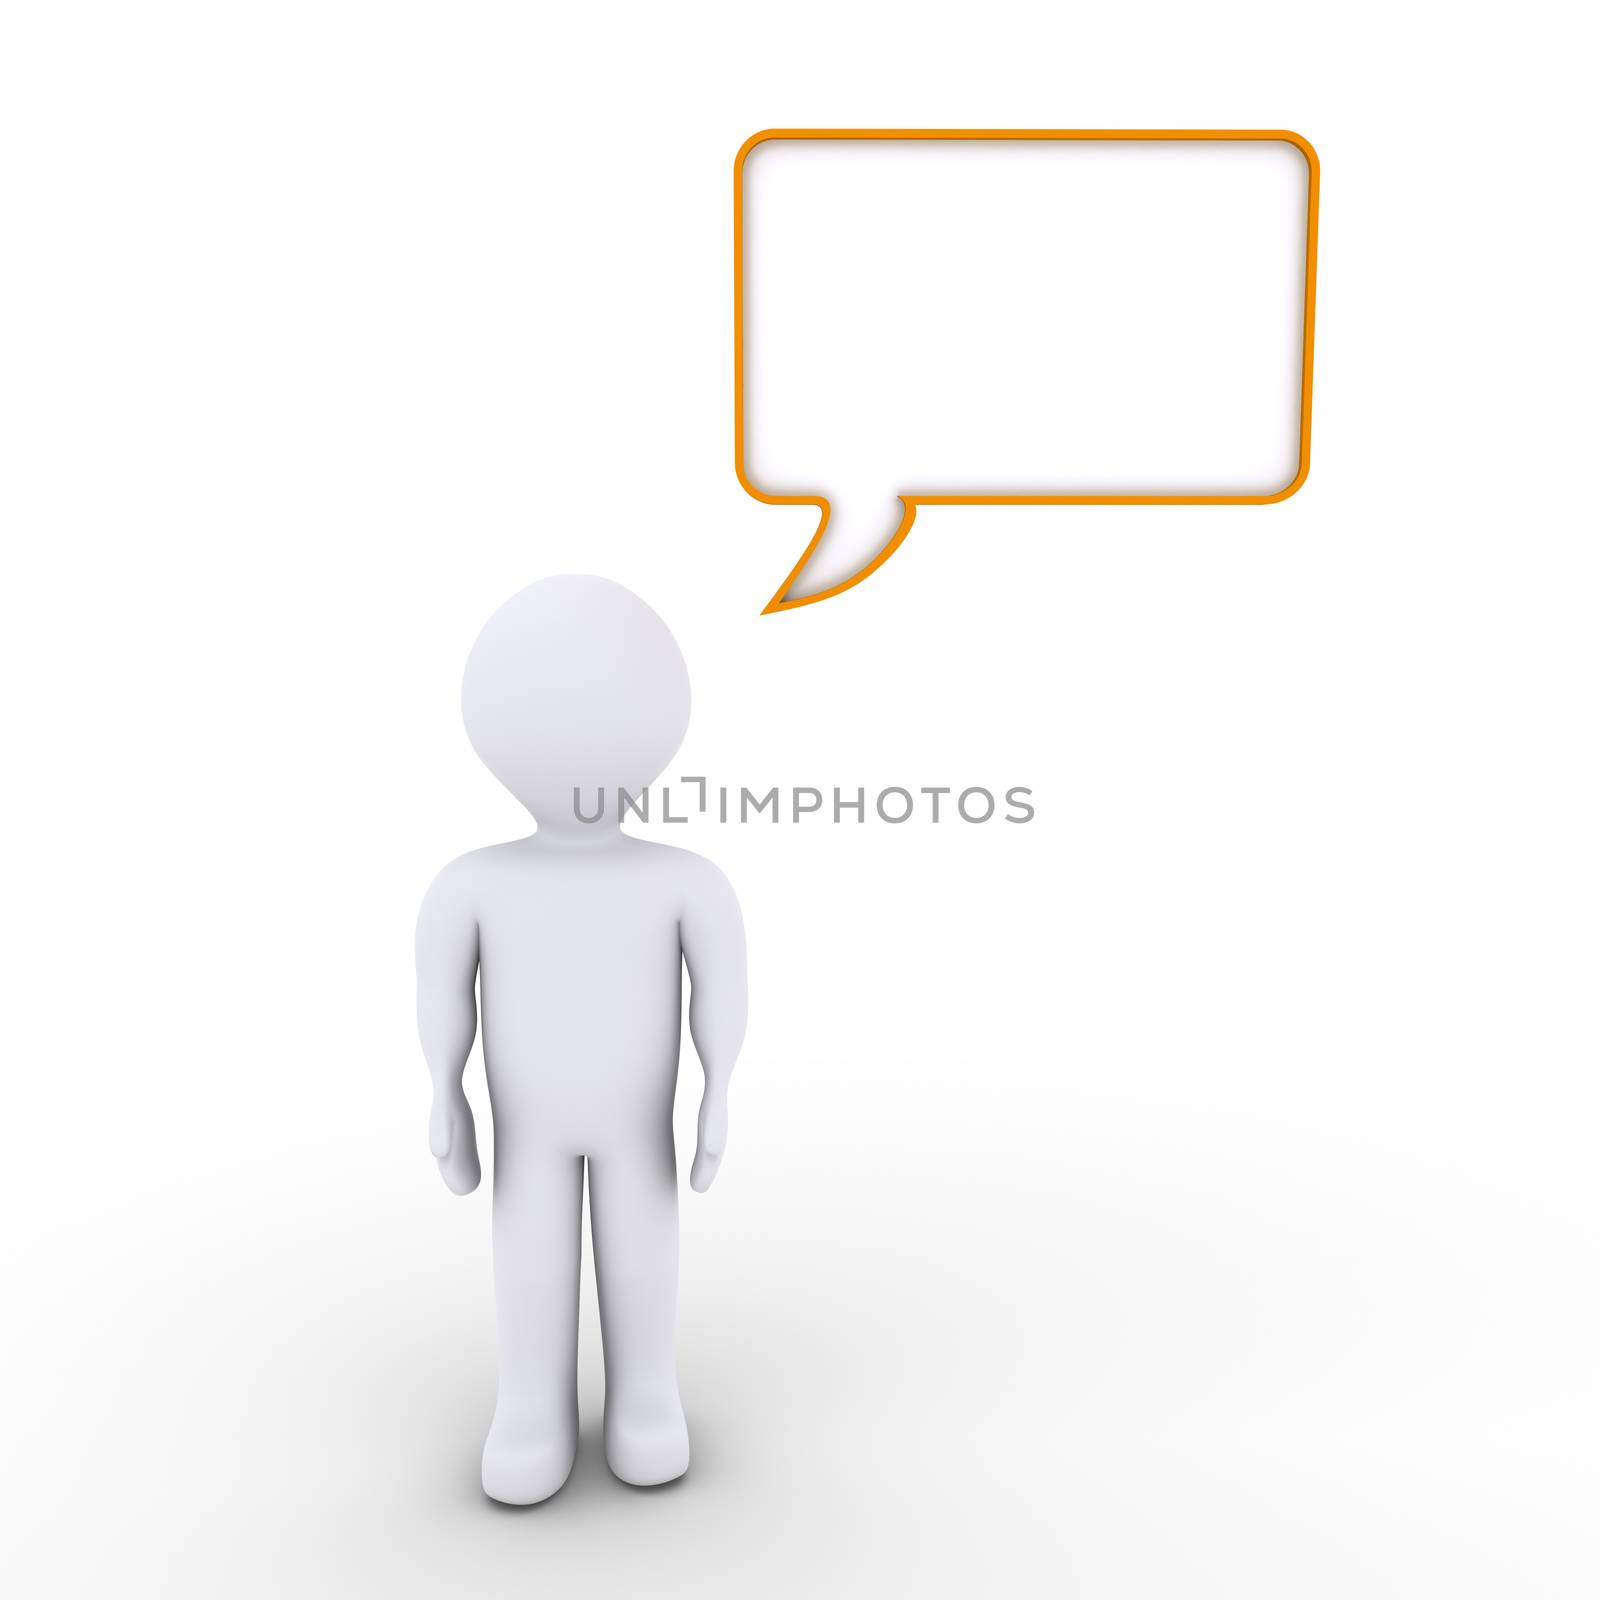 One blank 3d speech bubble over a person